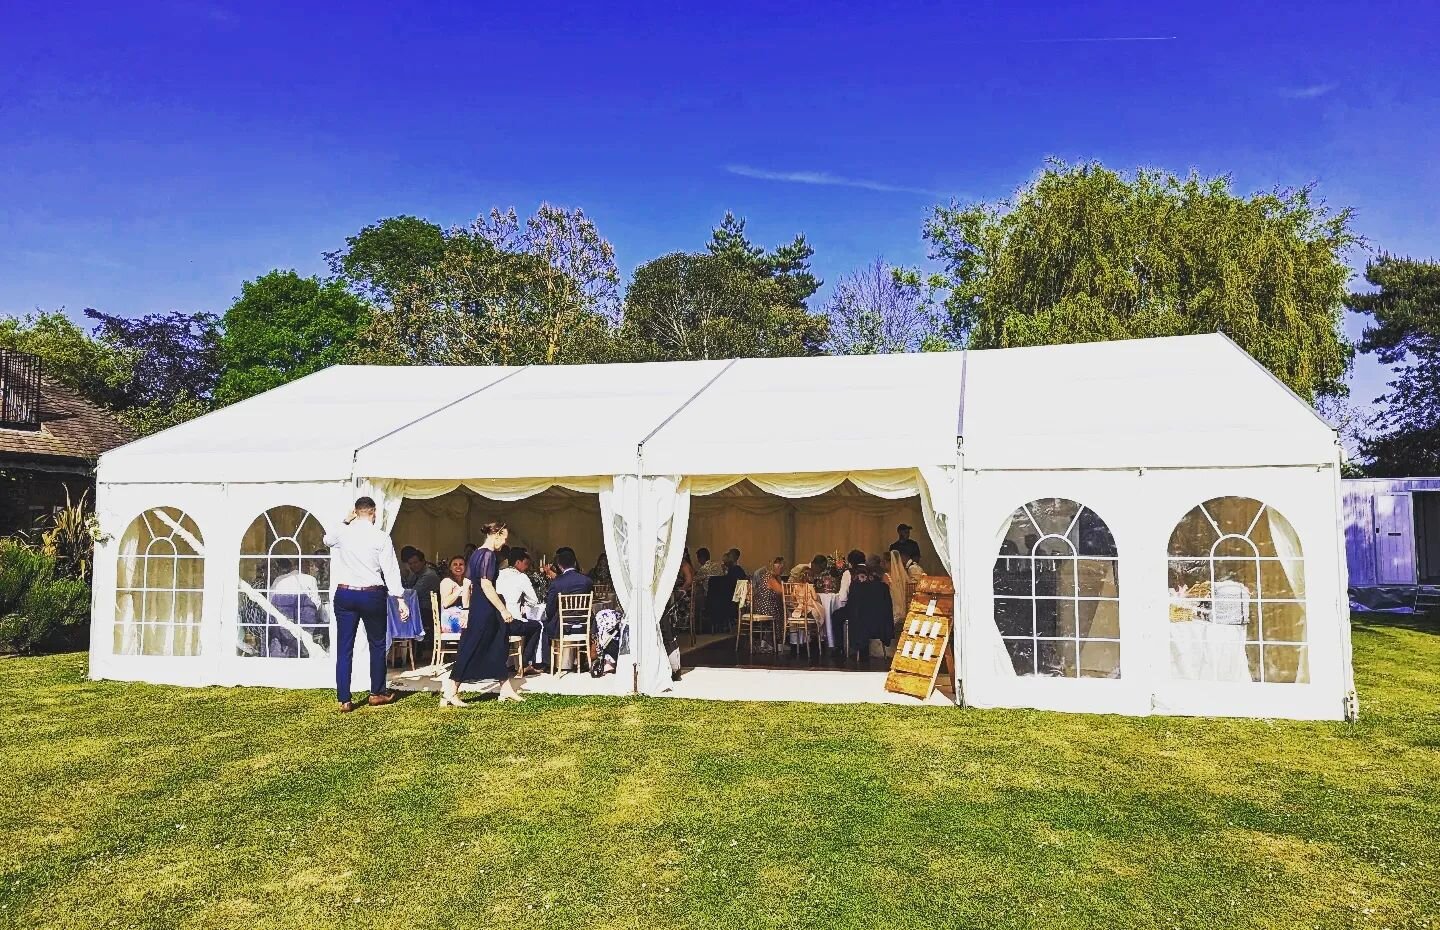 Marquee set up in a garden this weekend for a wedding, tent added at the back for catering crew

#westsussexmarquees #marqueehire #gardenwedding #cateringtent #marqueewedding #summertime #wedding #westsussexwedding #gardenmarquee